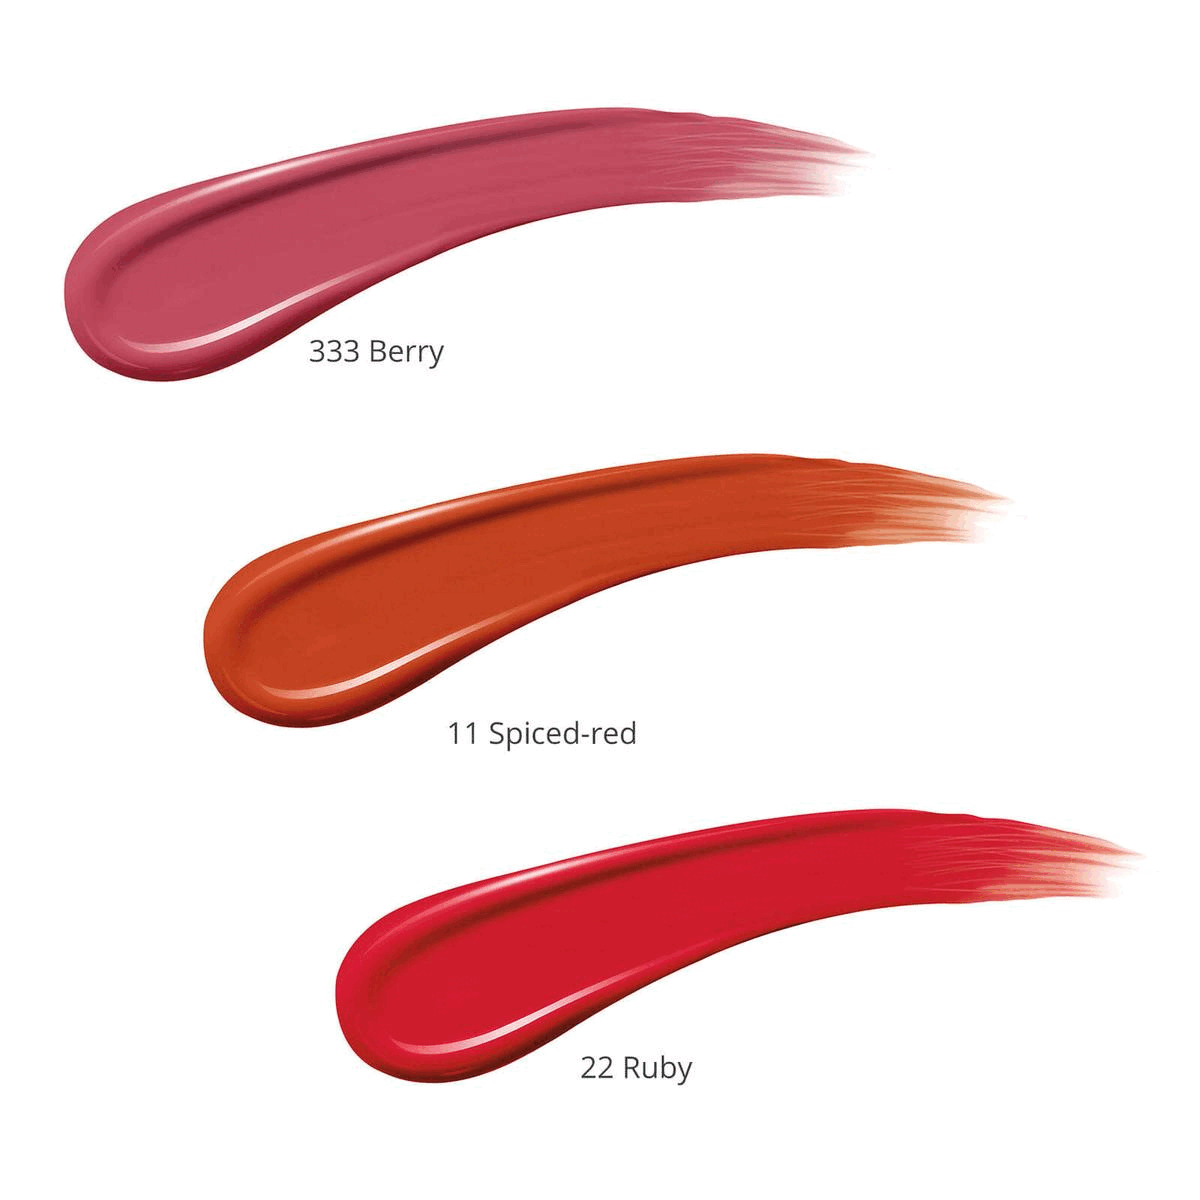 Lip Balm trio swatches. Models wearing shades.